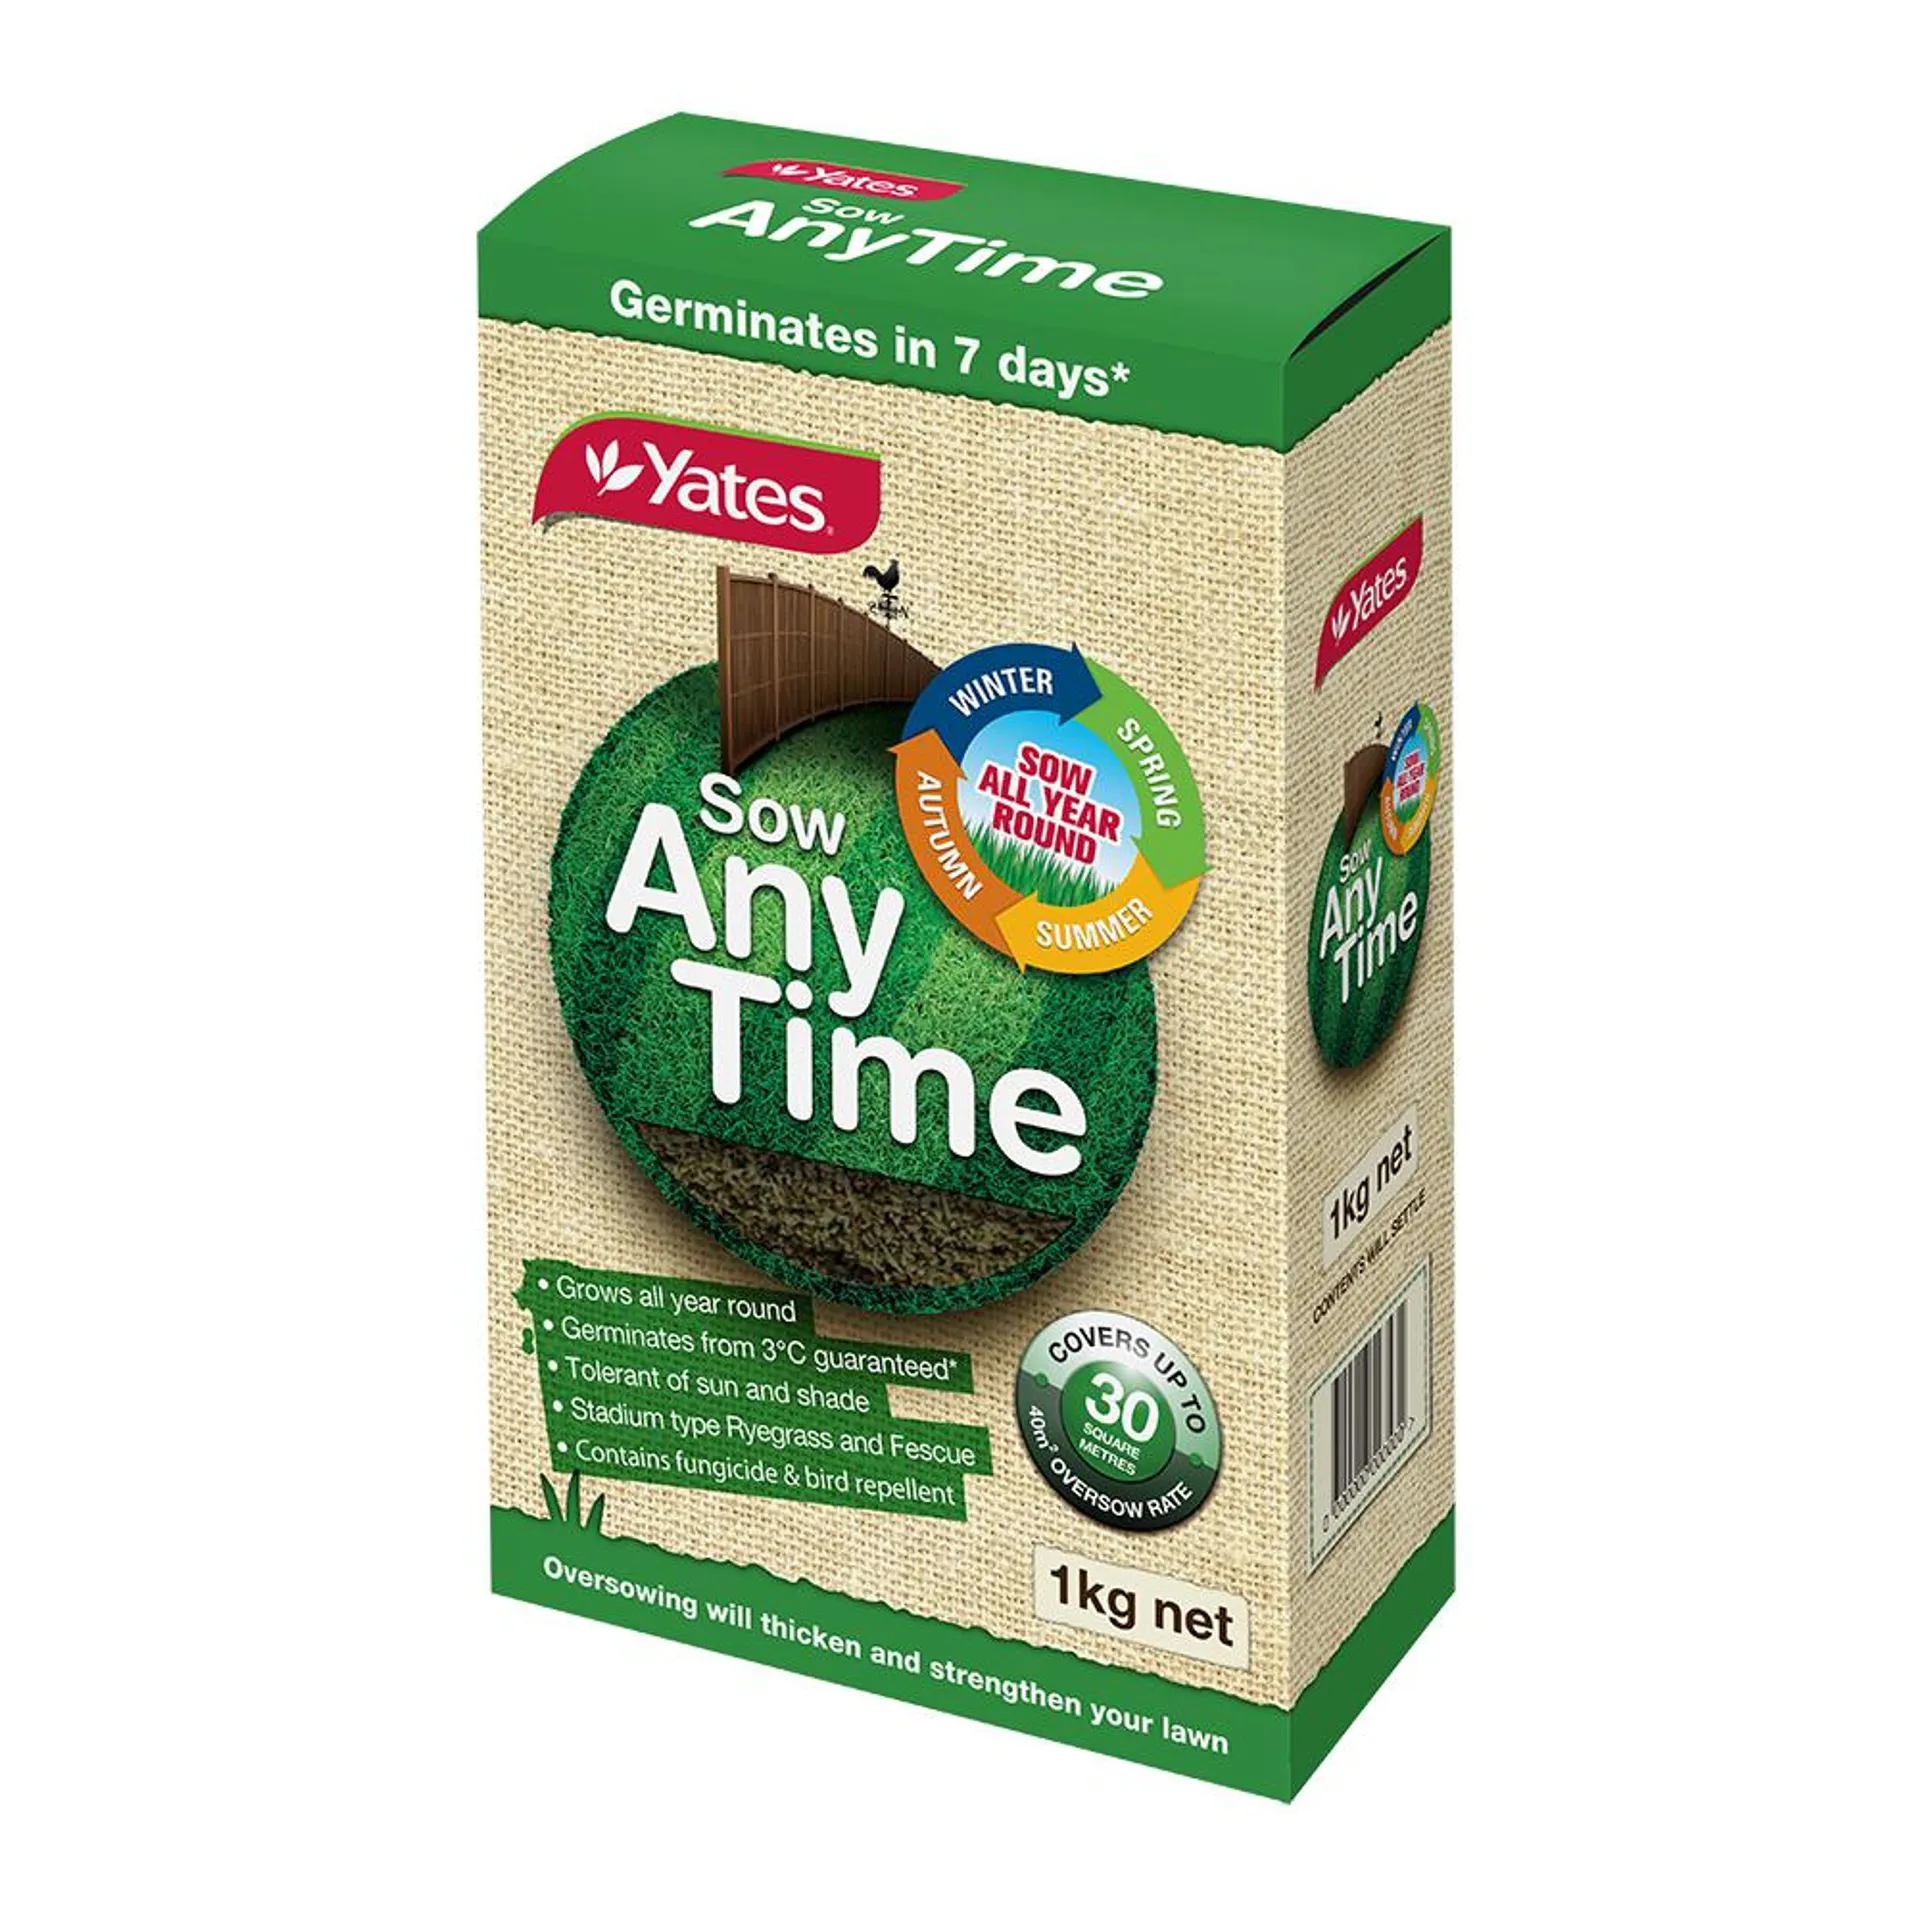 Yates Lawn Seed Sow Anytime - 1Kg